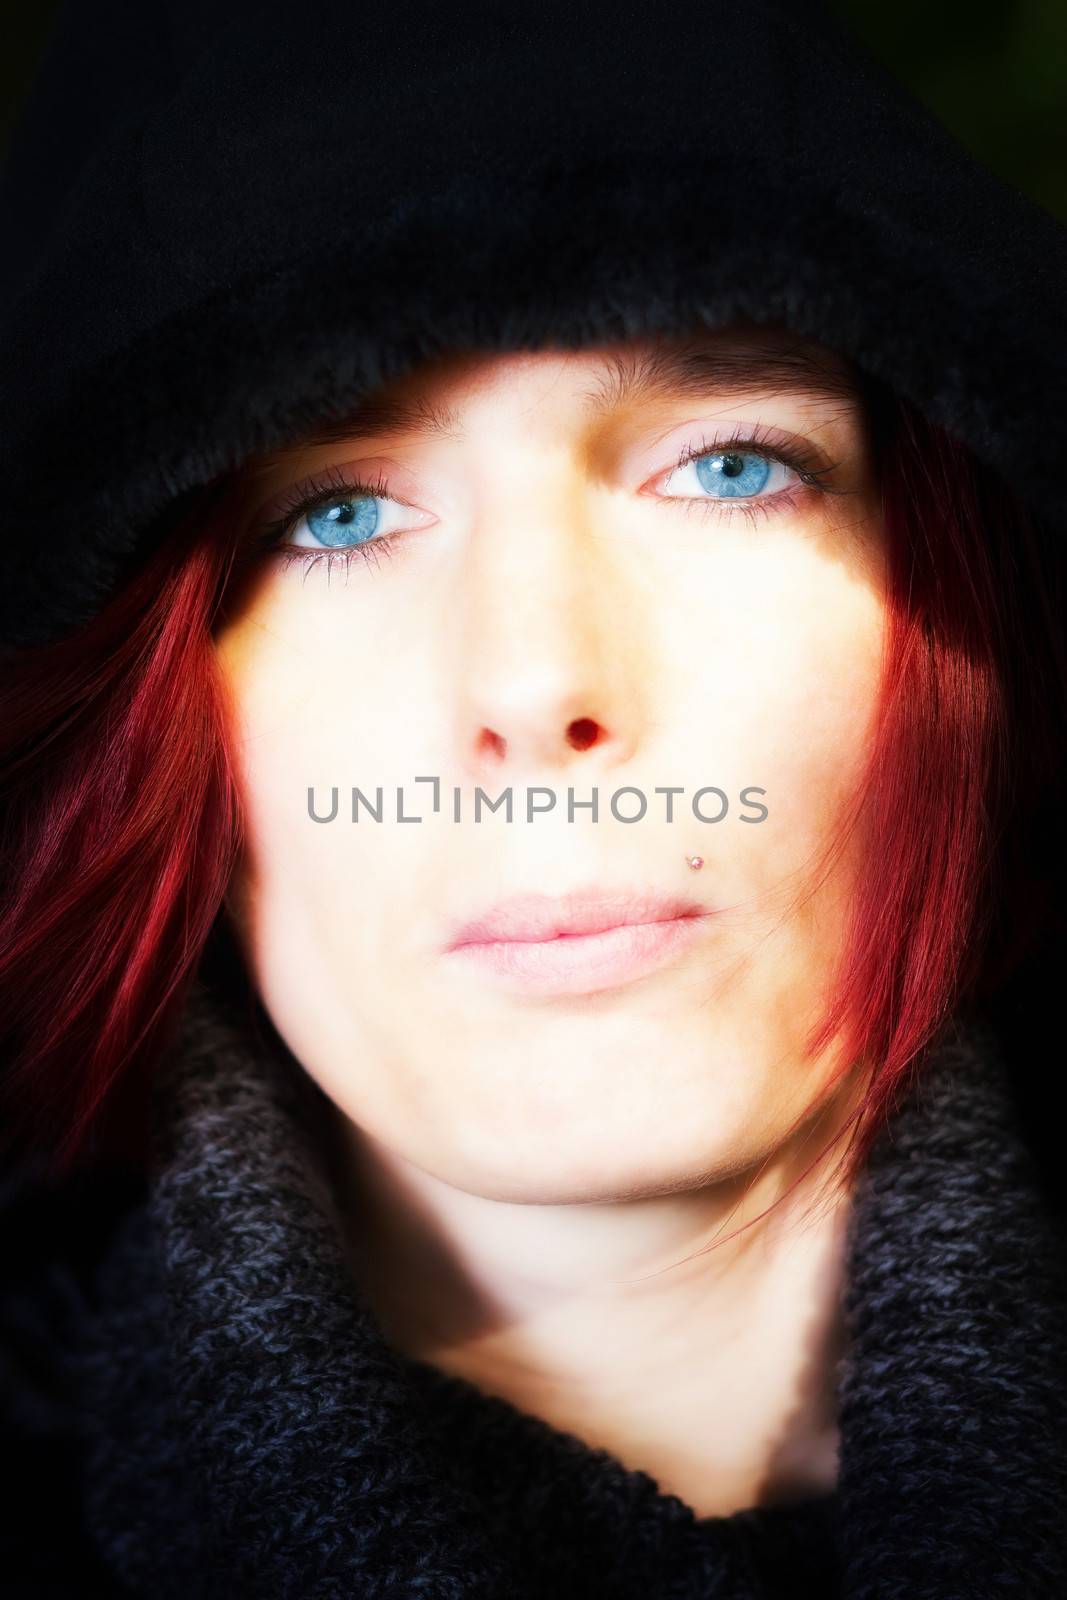 Close up head portrait of a beautiful redhead woman with startling blue eyes and a serene expression